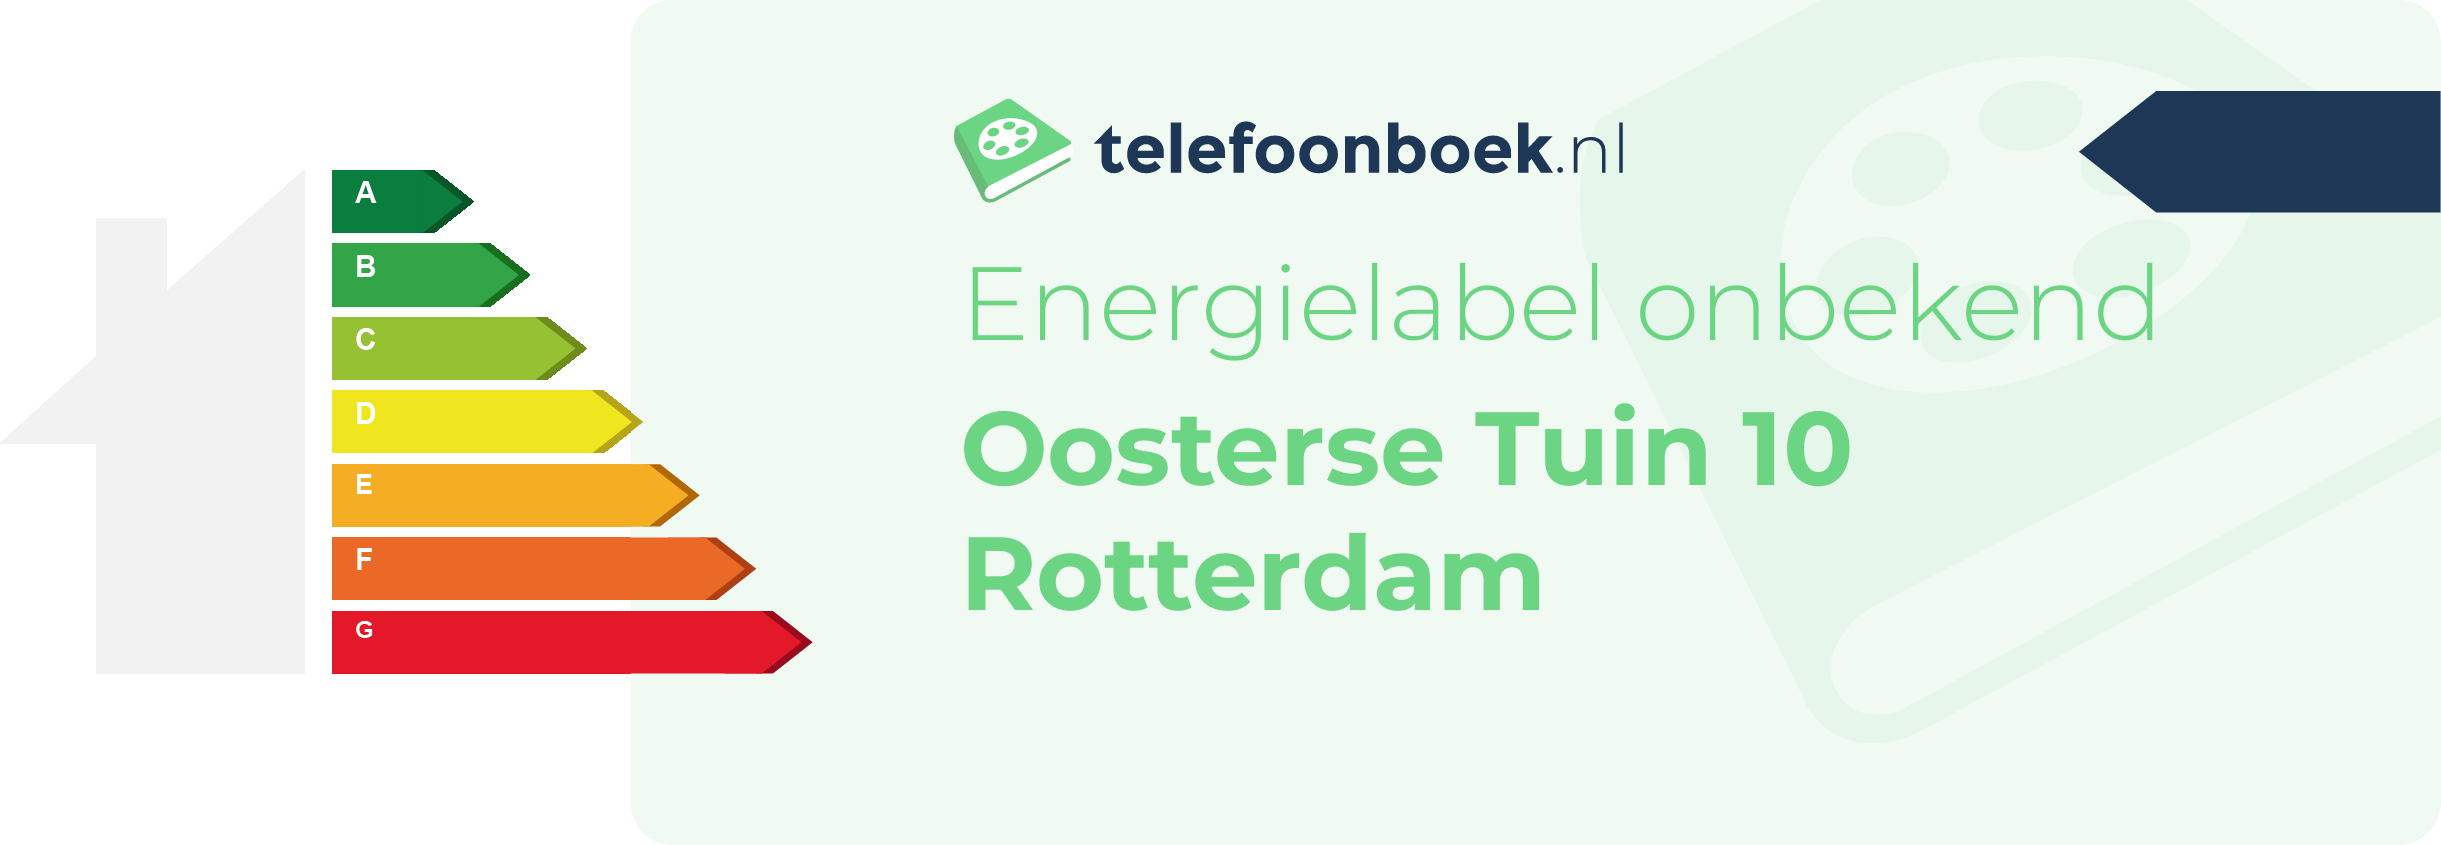 Energielabel Oosterse Tuin 10 Rotterdam